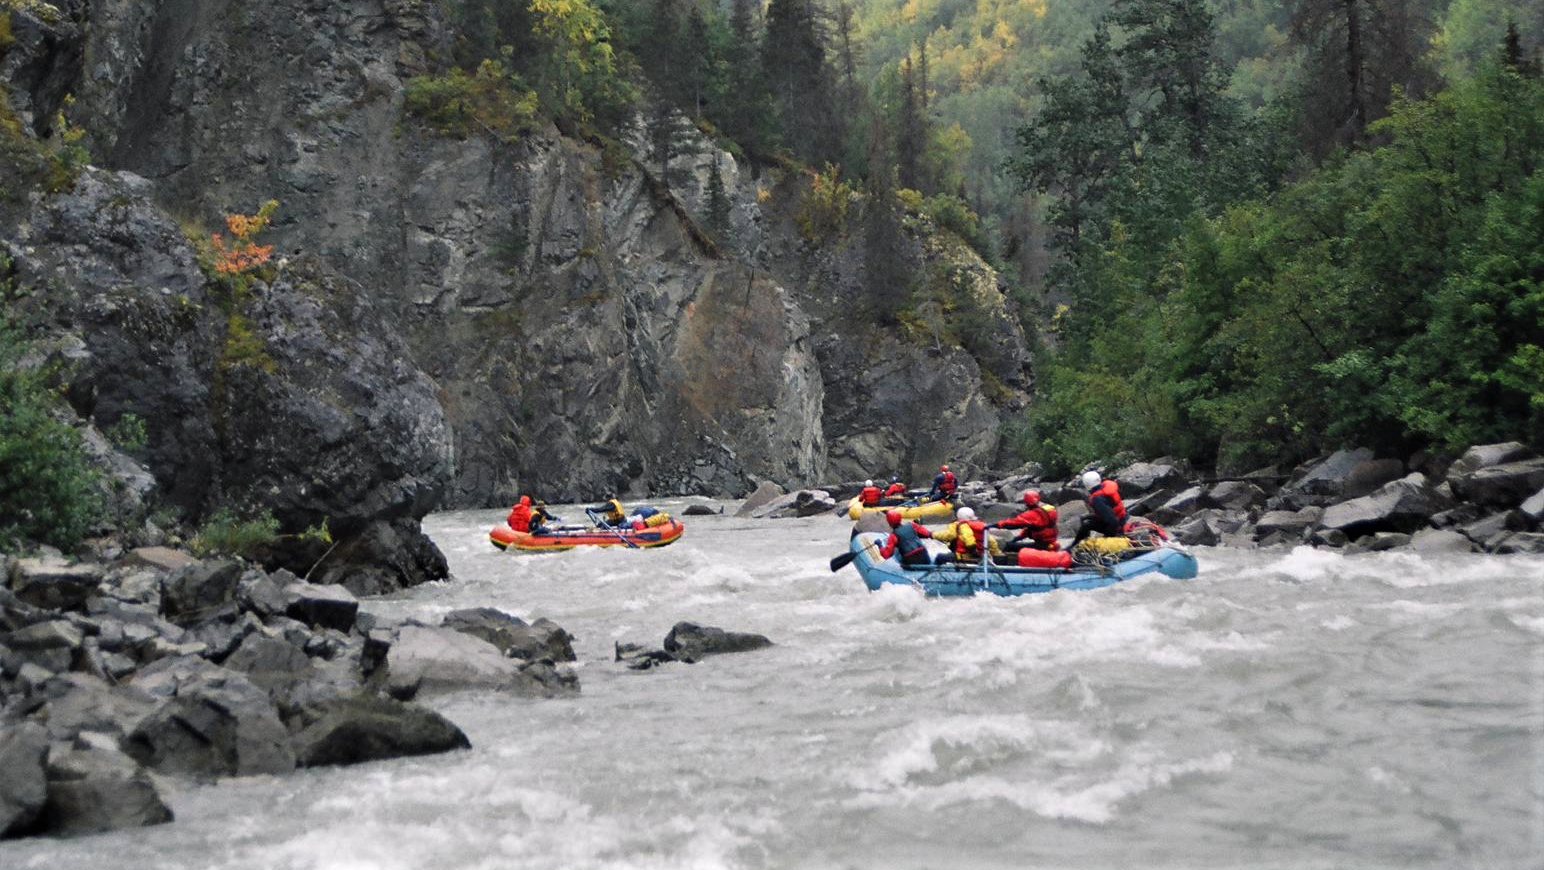 rafts navigating through whitewater conditions